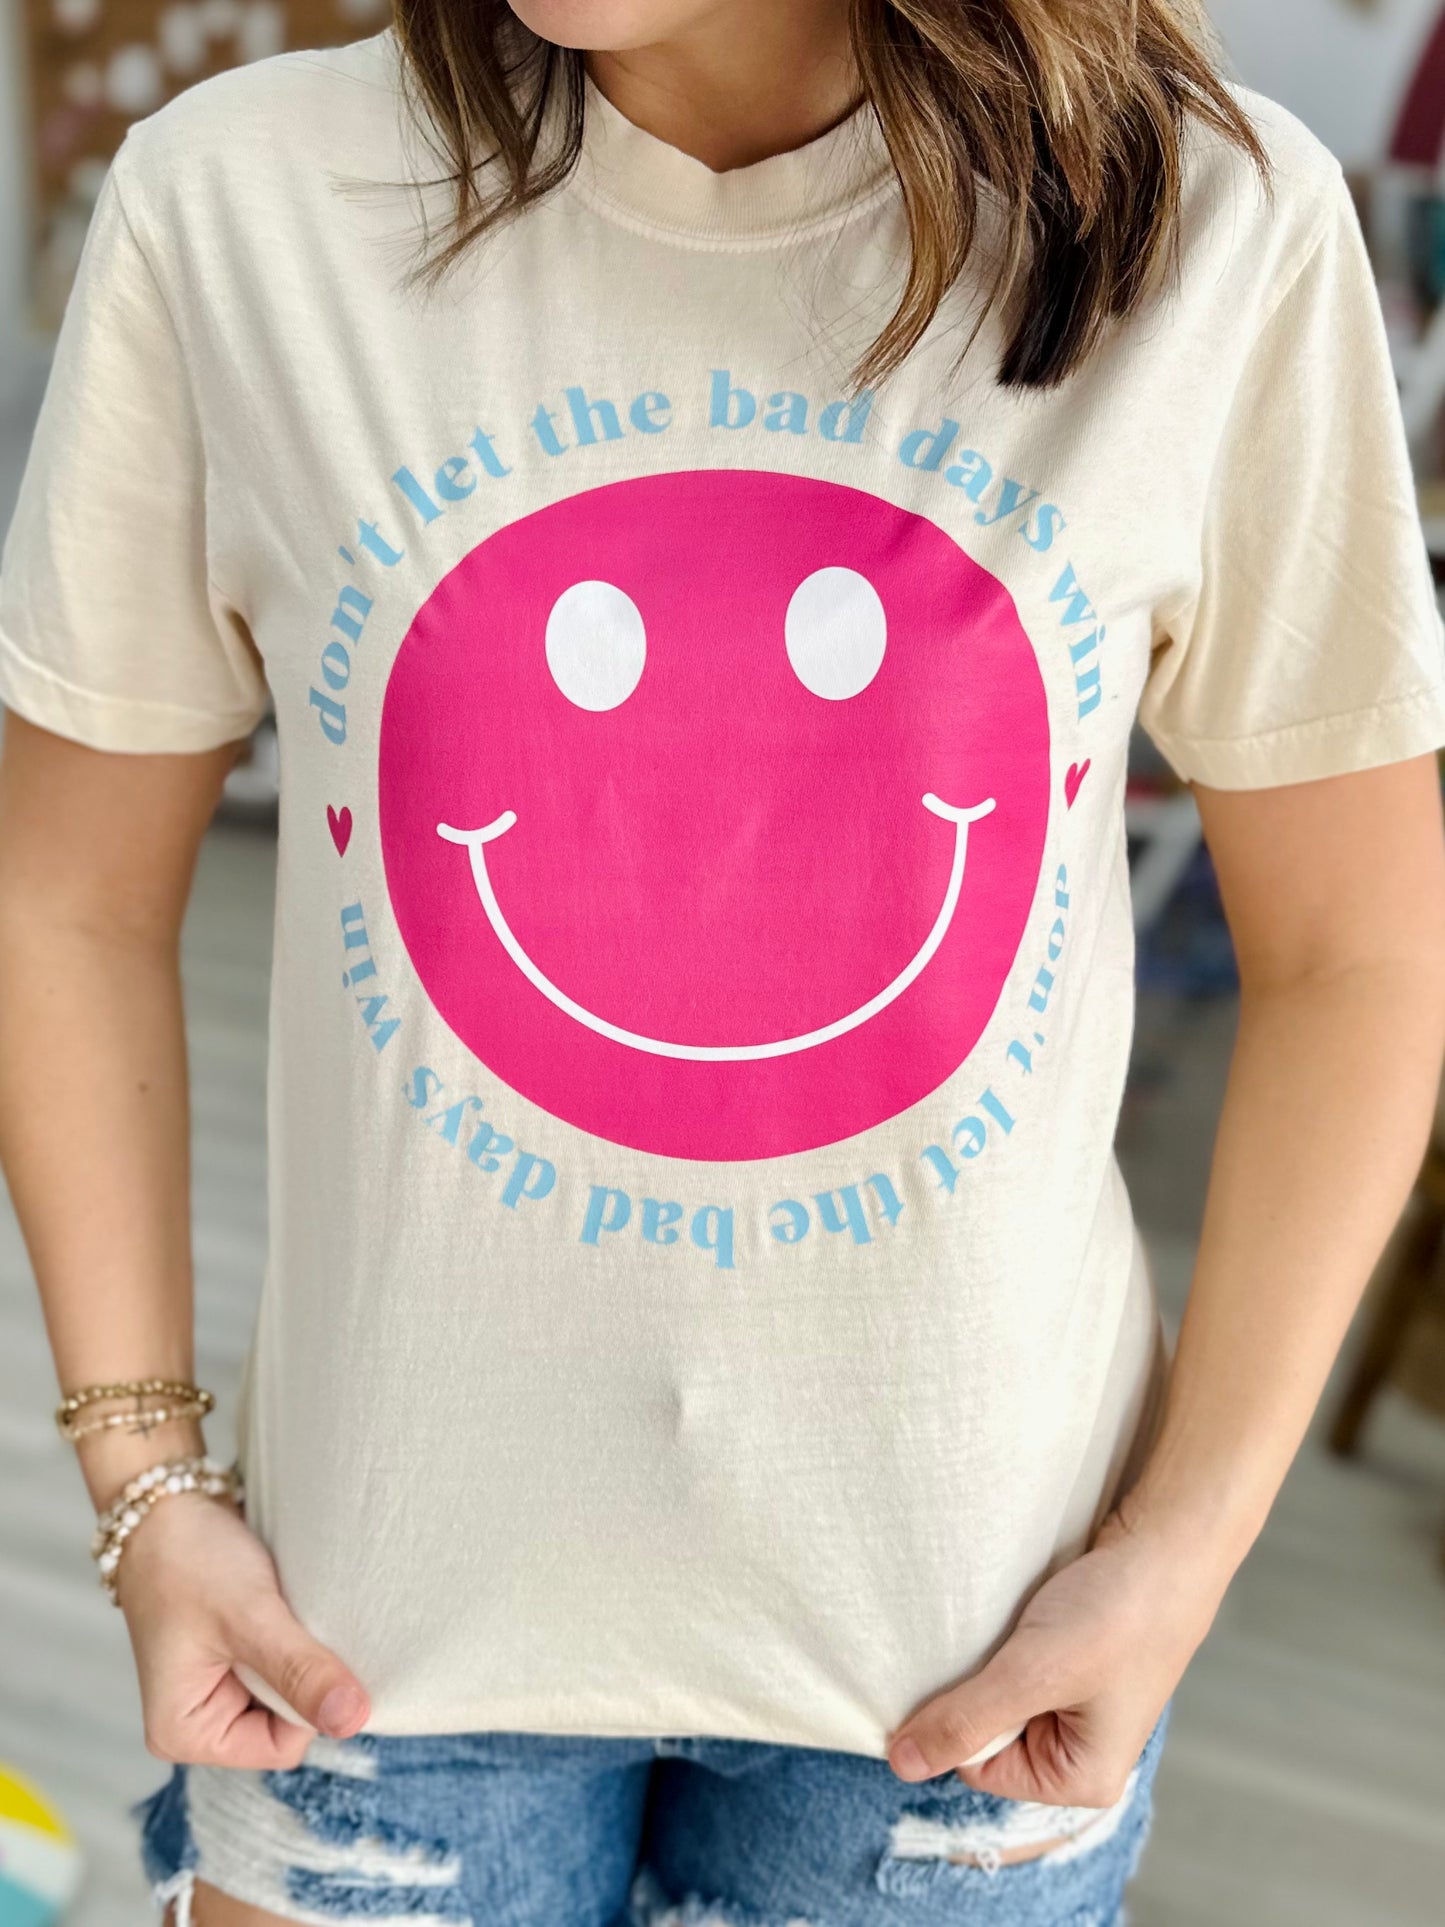 Don't Let the Bad Days Win Tee